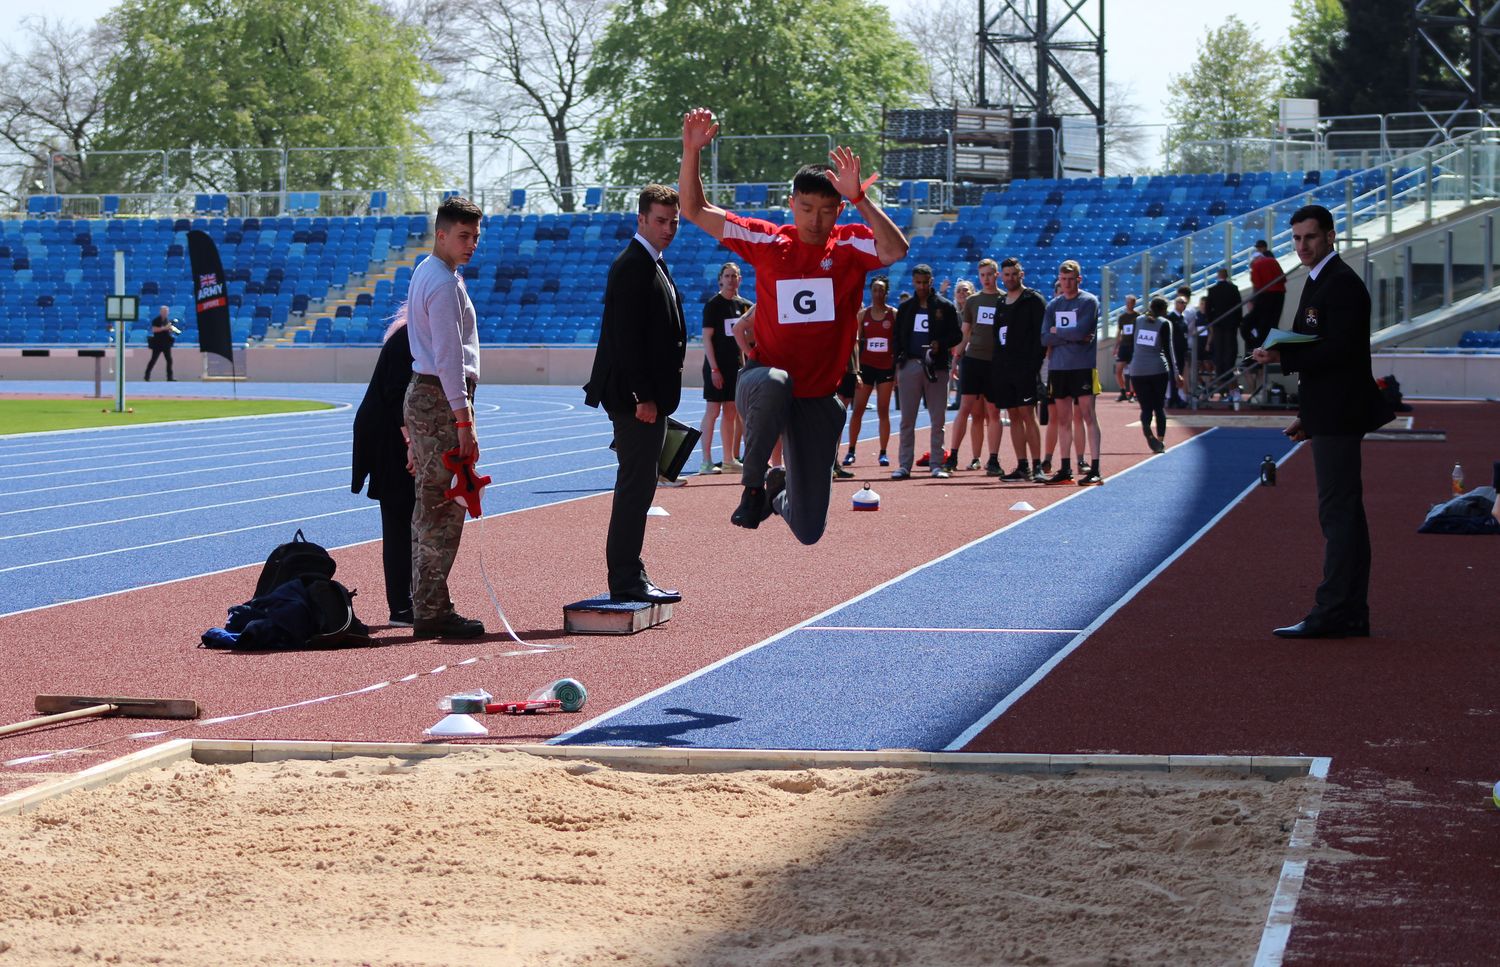 An Army athlete is mid-jump through the long jump at the Midlands Army Athletics Championships at the Alexander Stadium, watched by judges and other competing members from the Army